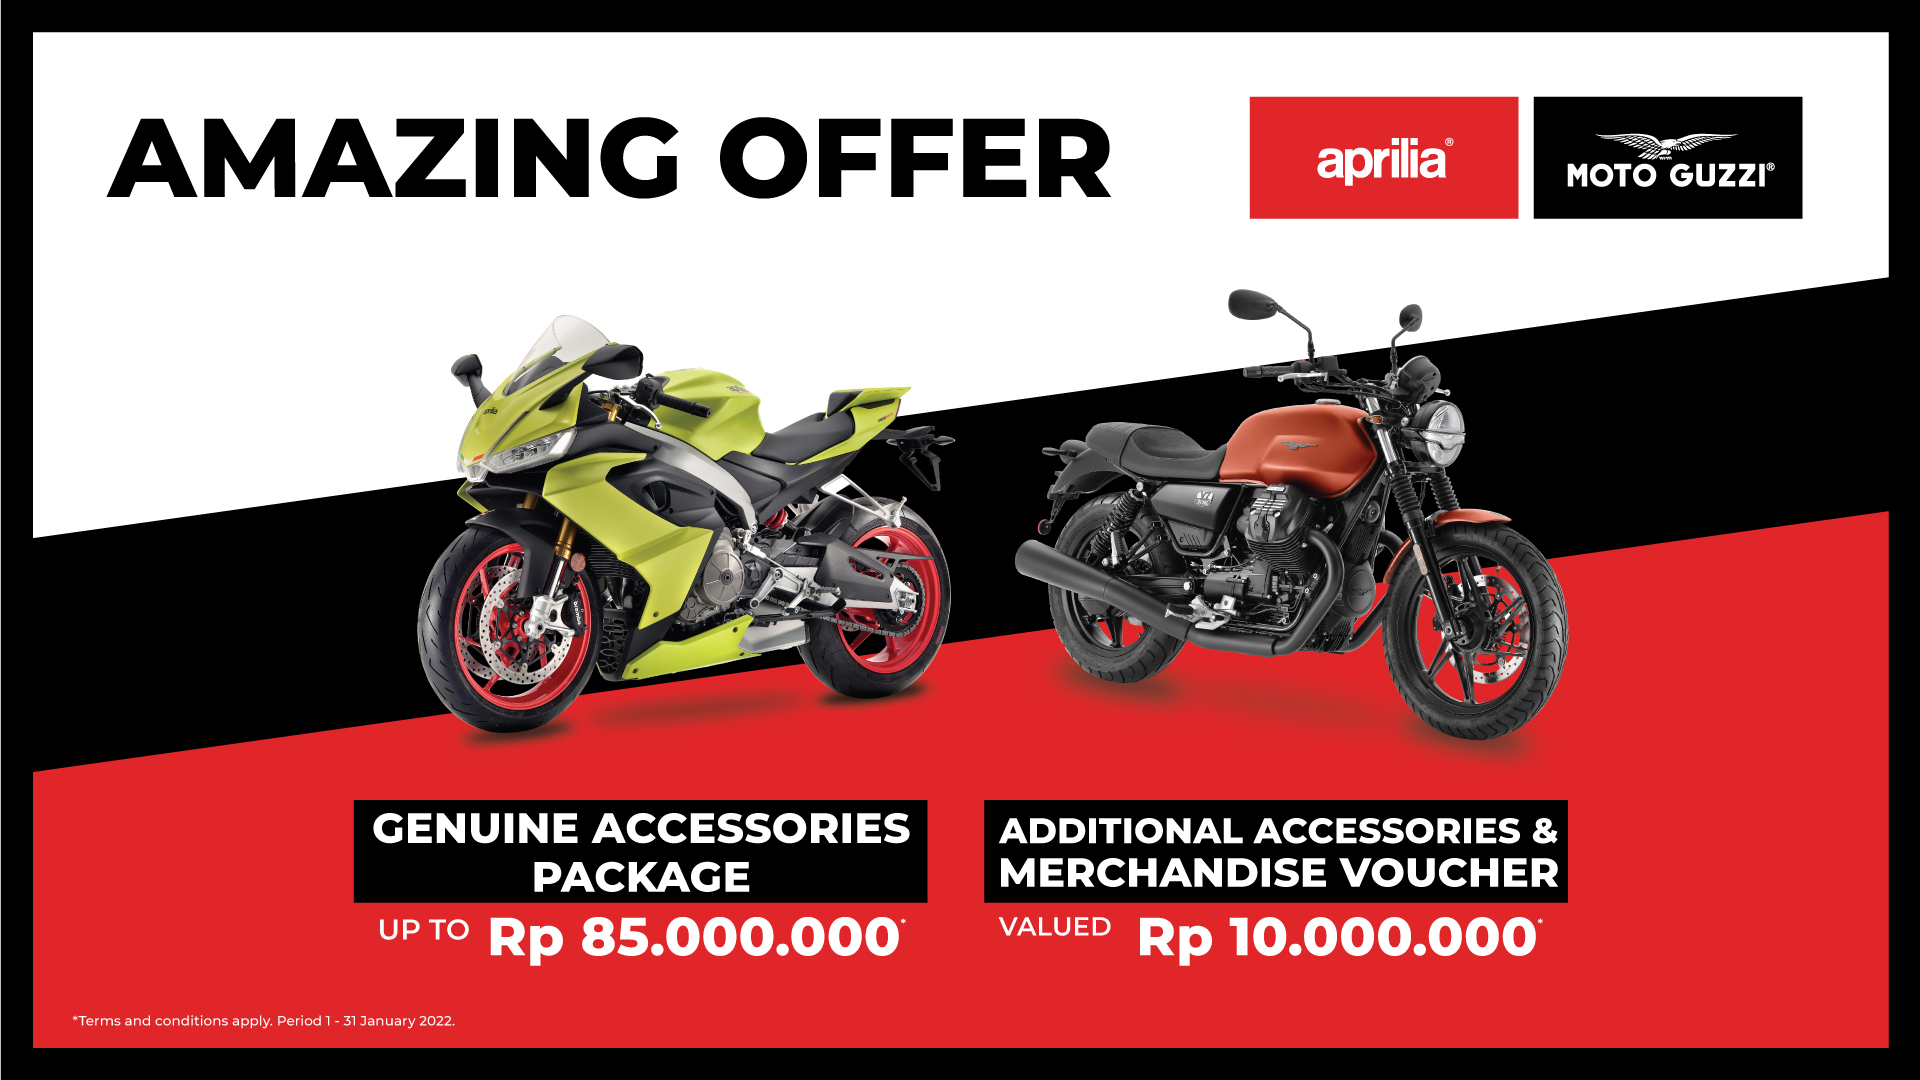 PT Piaggio Indonesia Begins the New Year with Amazing Offers for a Colourful Journey Ahead